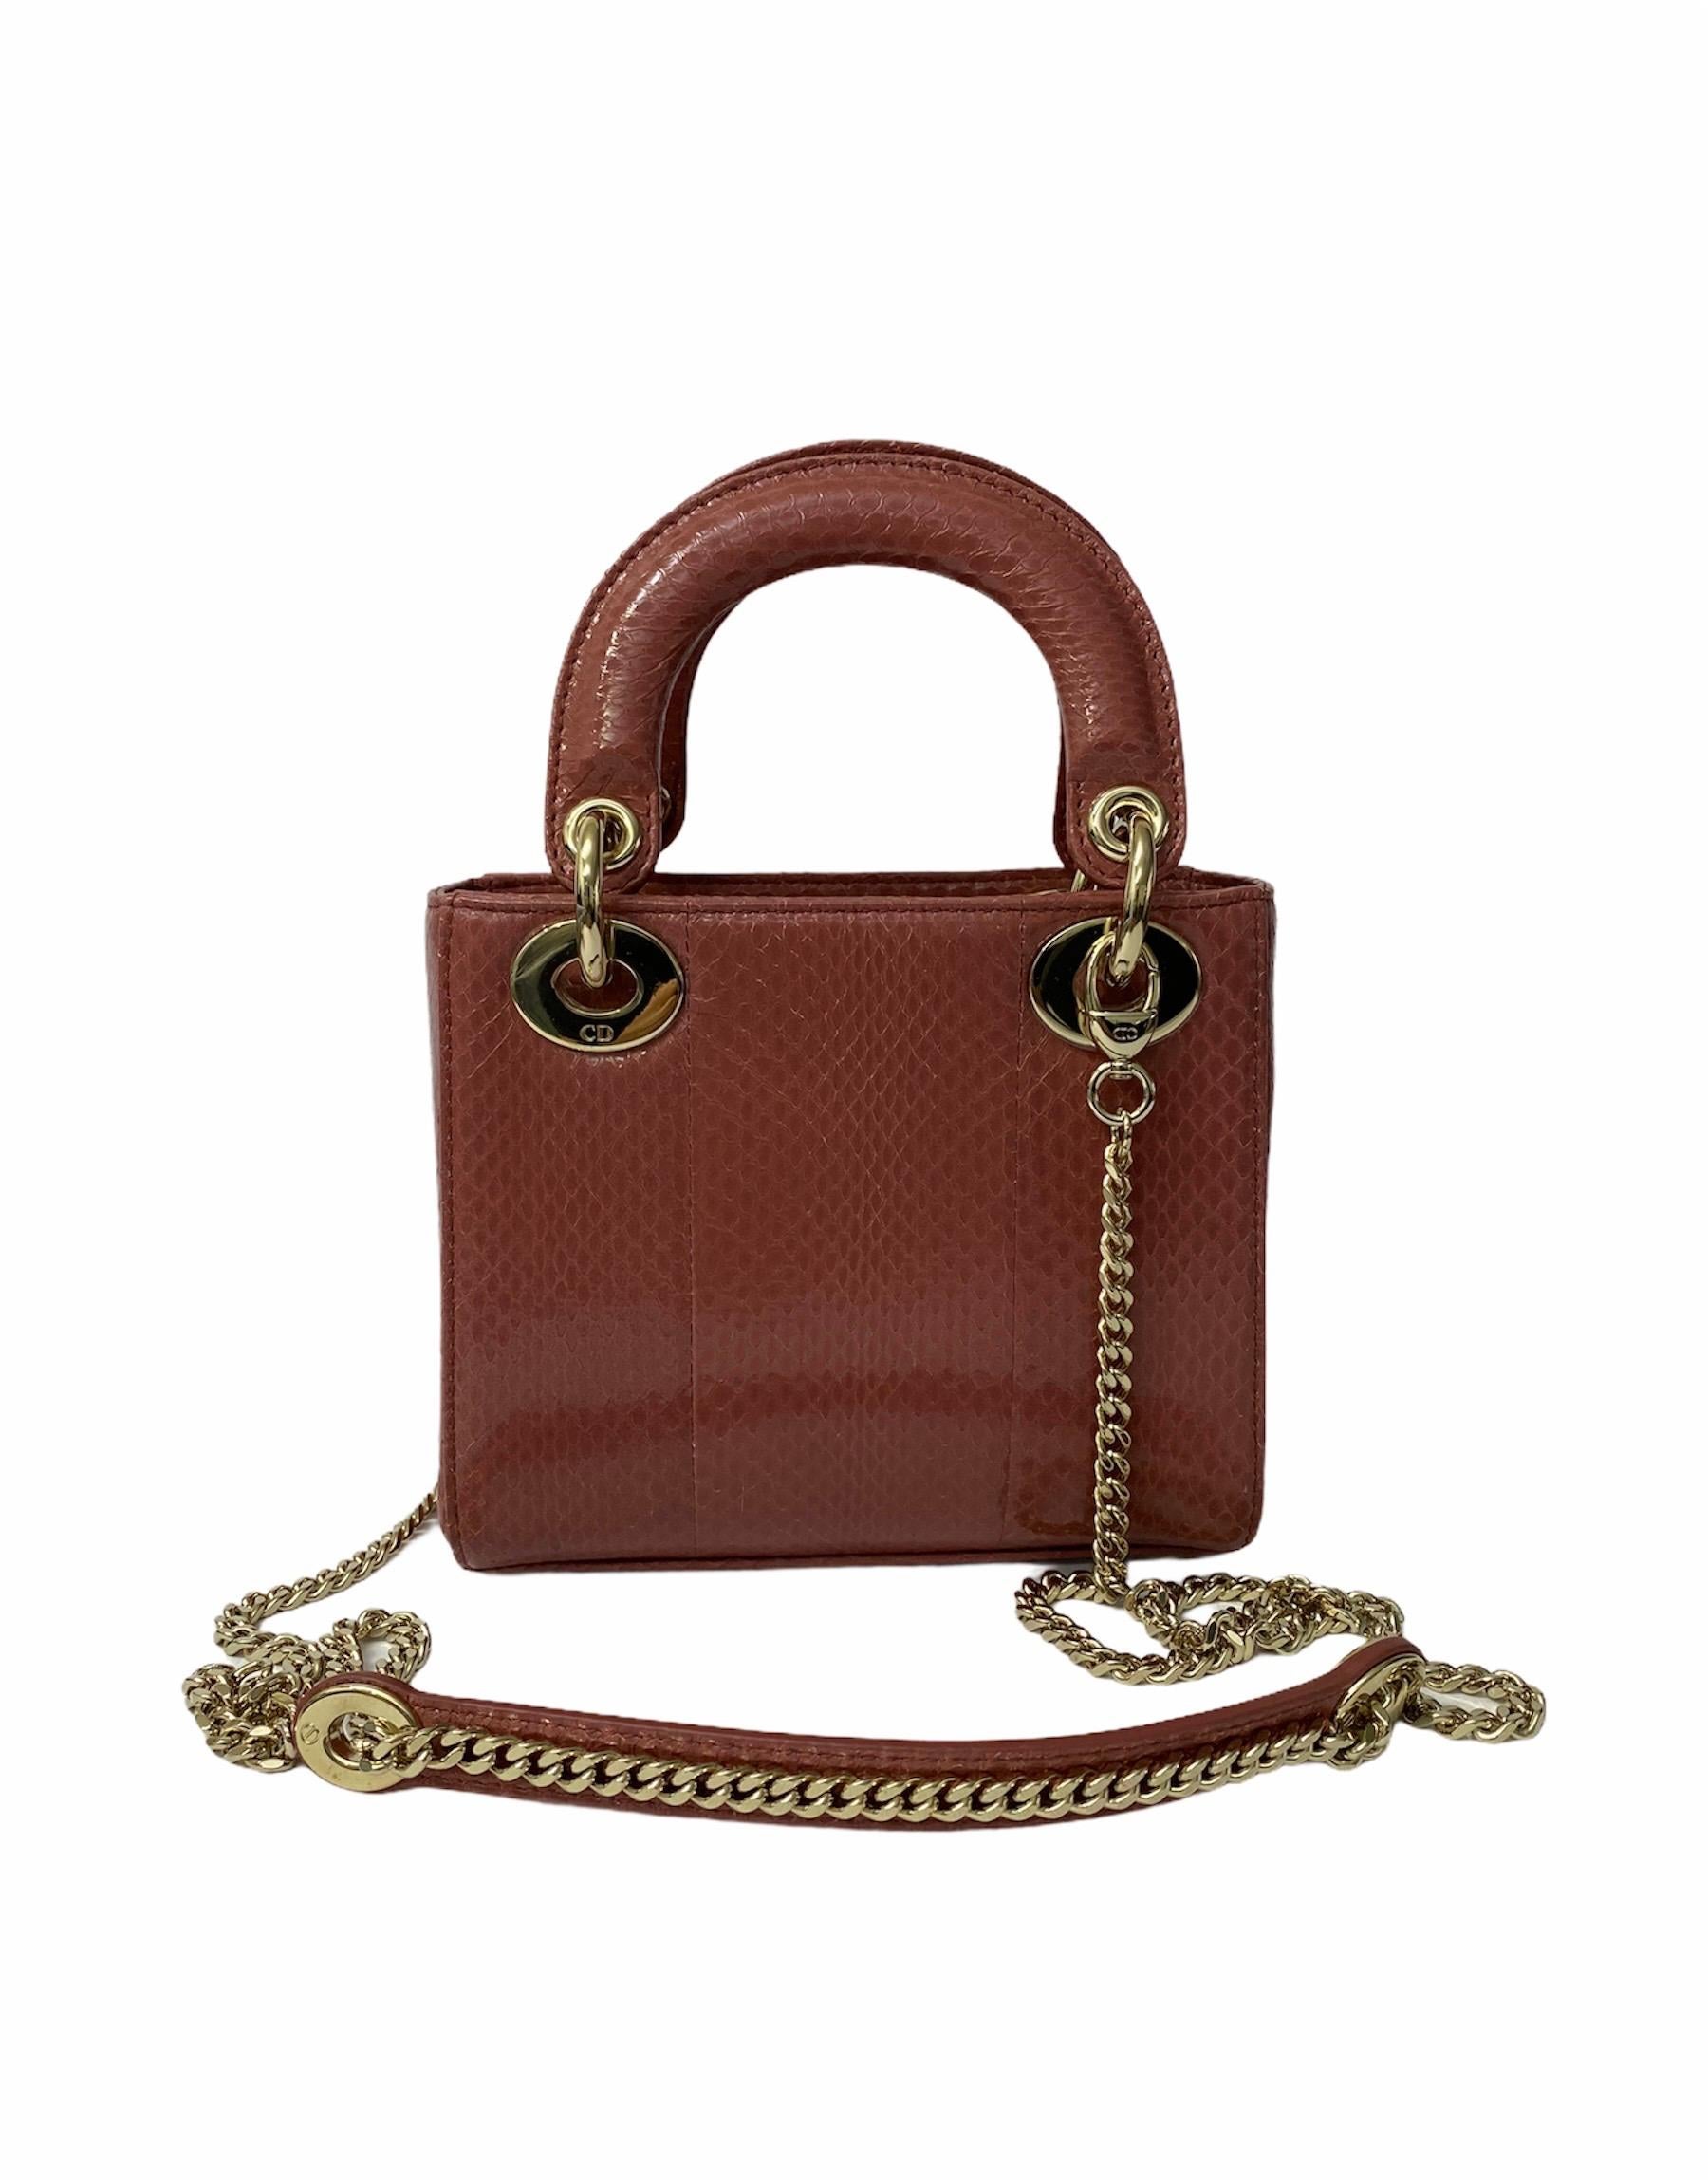 Bag signed Dior, Lady line, made of antique pink patent leather with golden hardware. The product has no closure, internally lined in pink suede, roomy for the essentials. It also has two rigid handles, a removable patent and chain shoulder strap